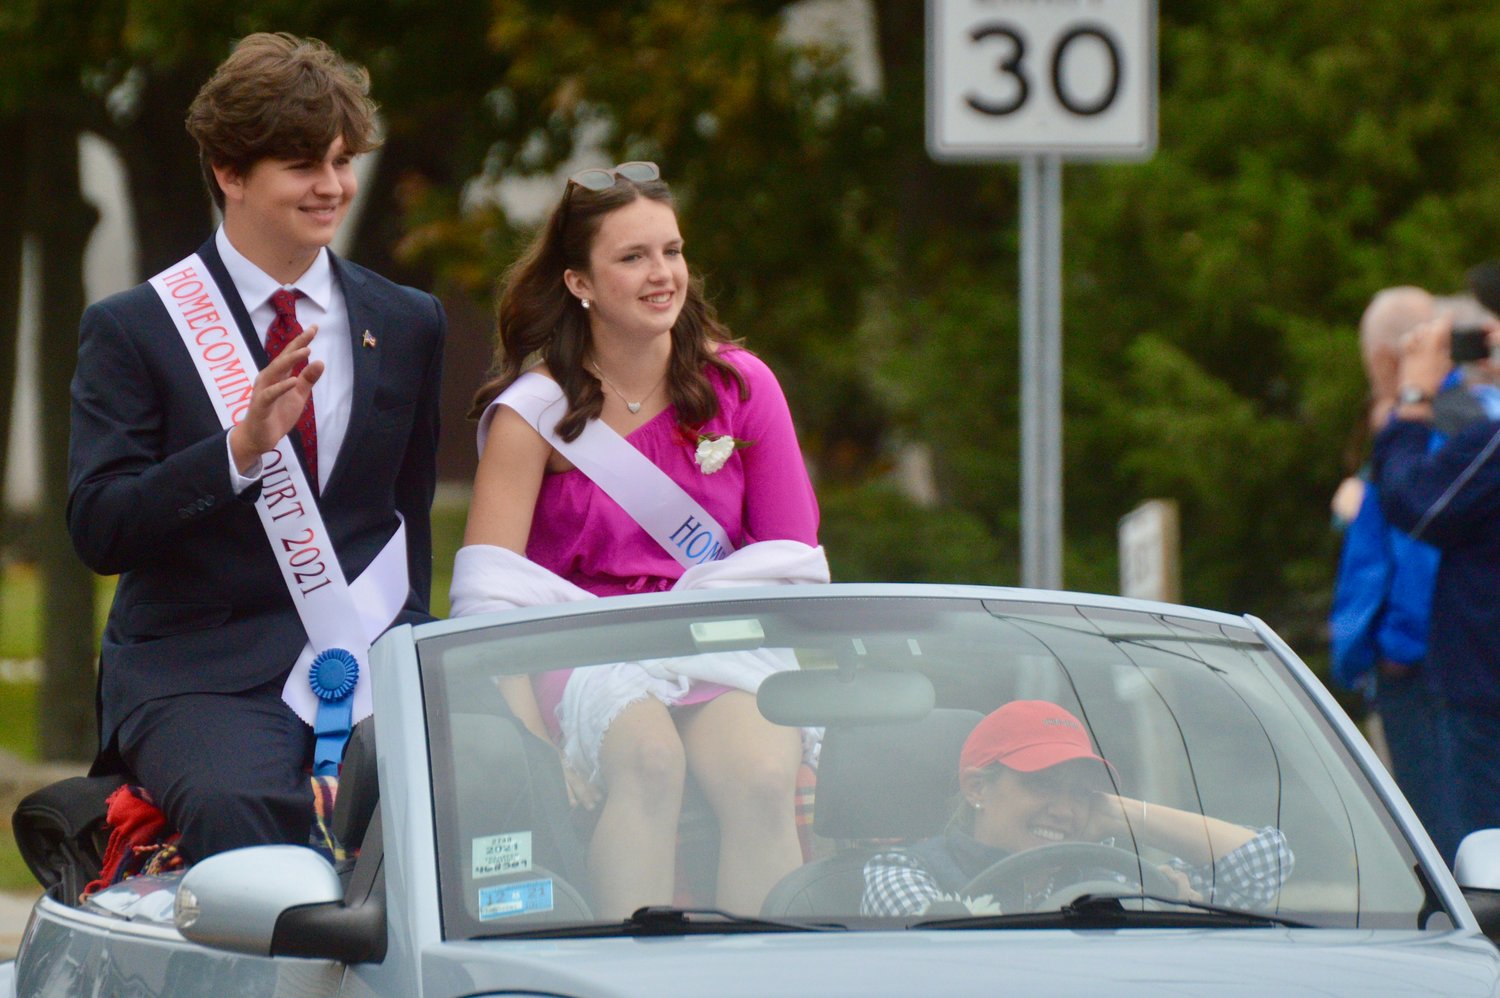 Andrew Lopes and Amory Kirwin of the Homecoming court greet spectators along East Main Road during the parade.